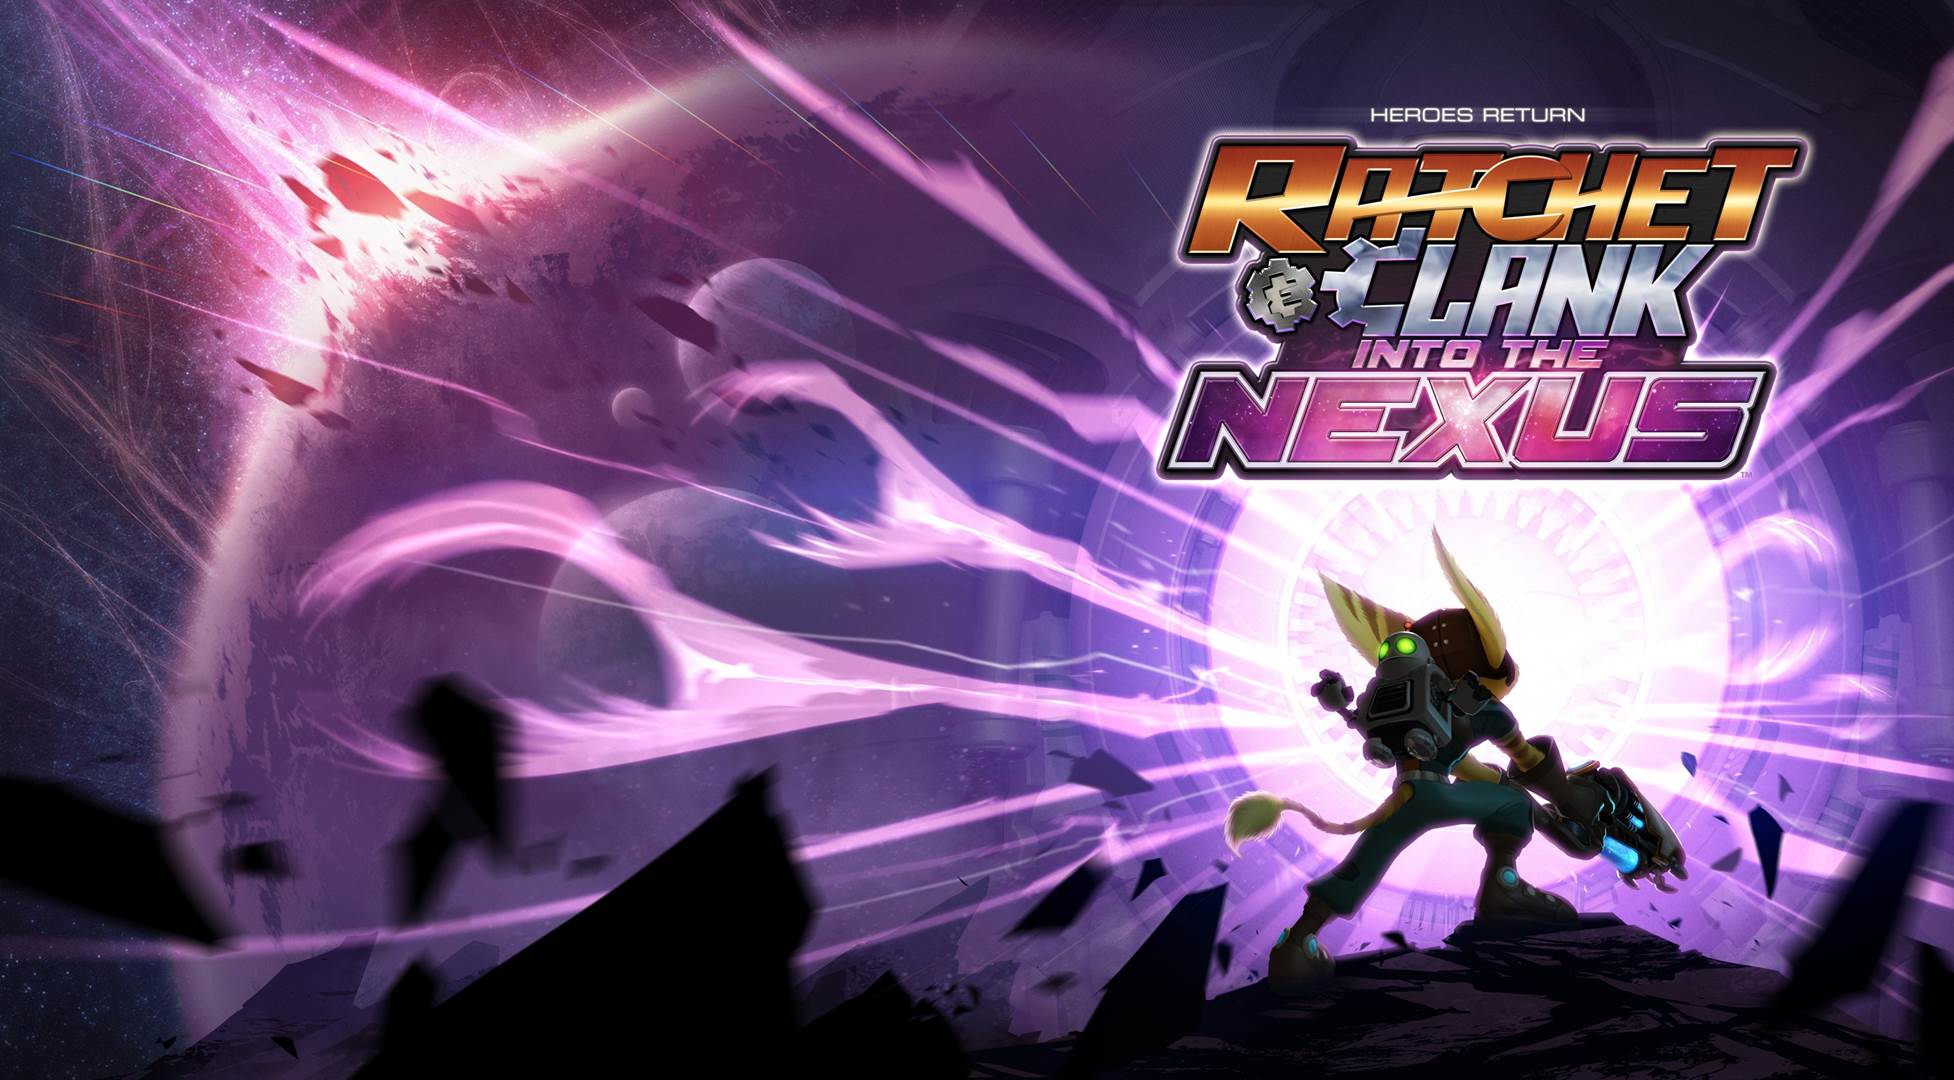 Ratchet And Clank Into The Nexus Wallpaper in 1080P HD